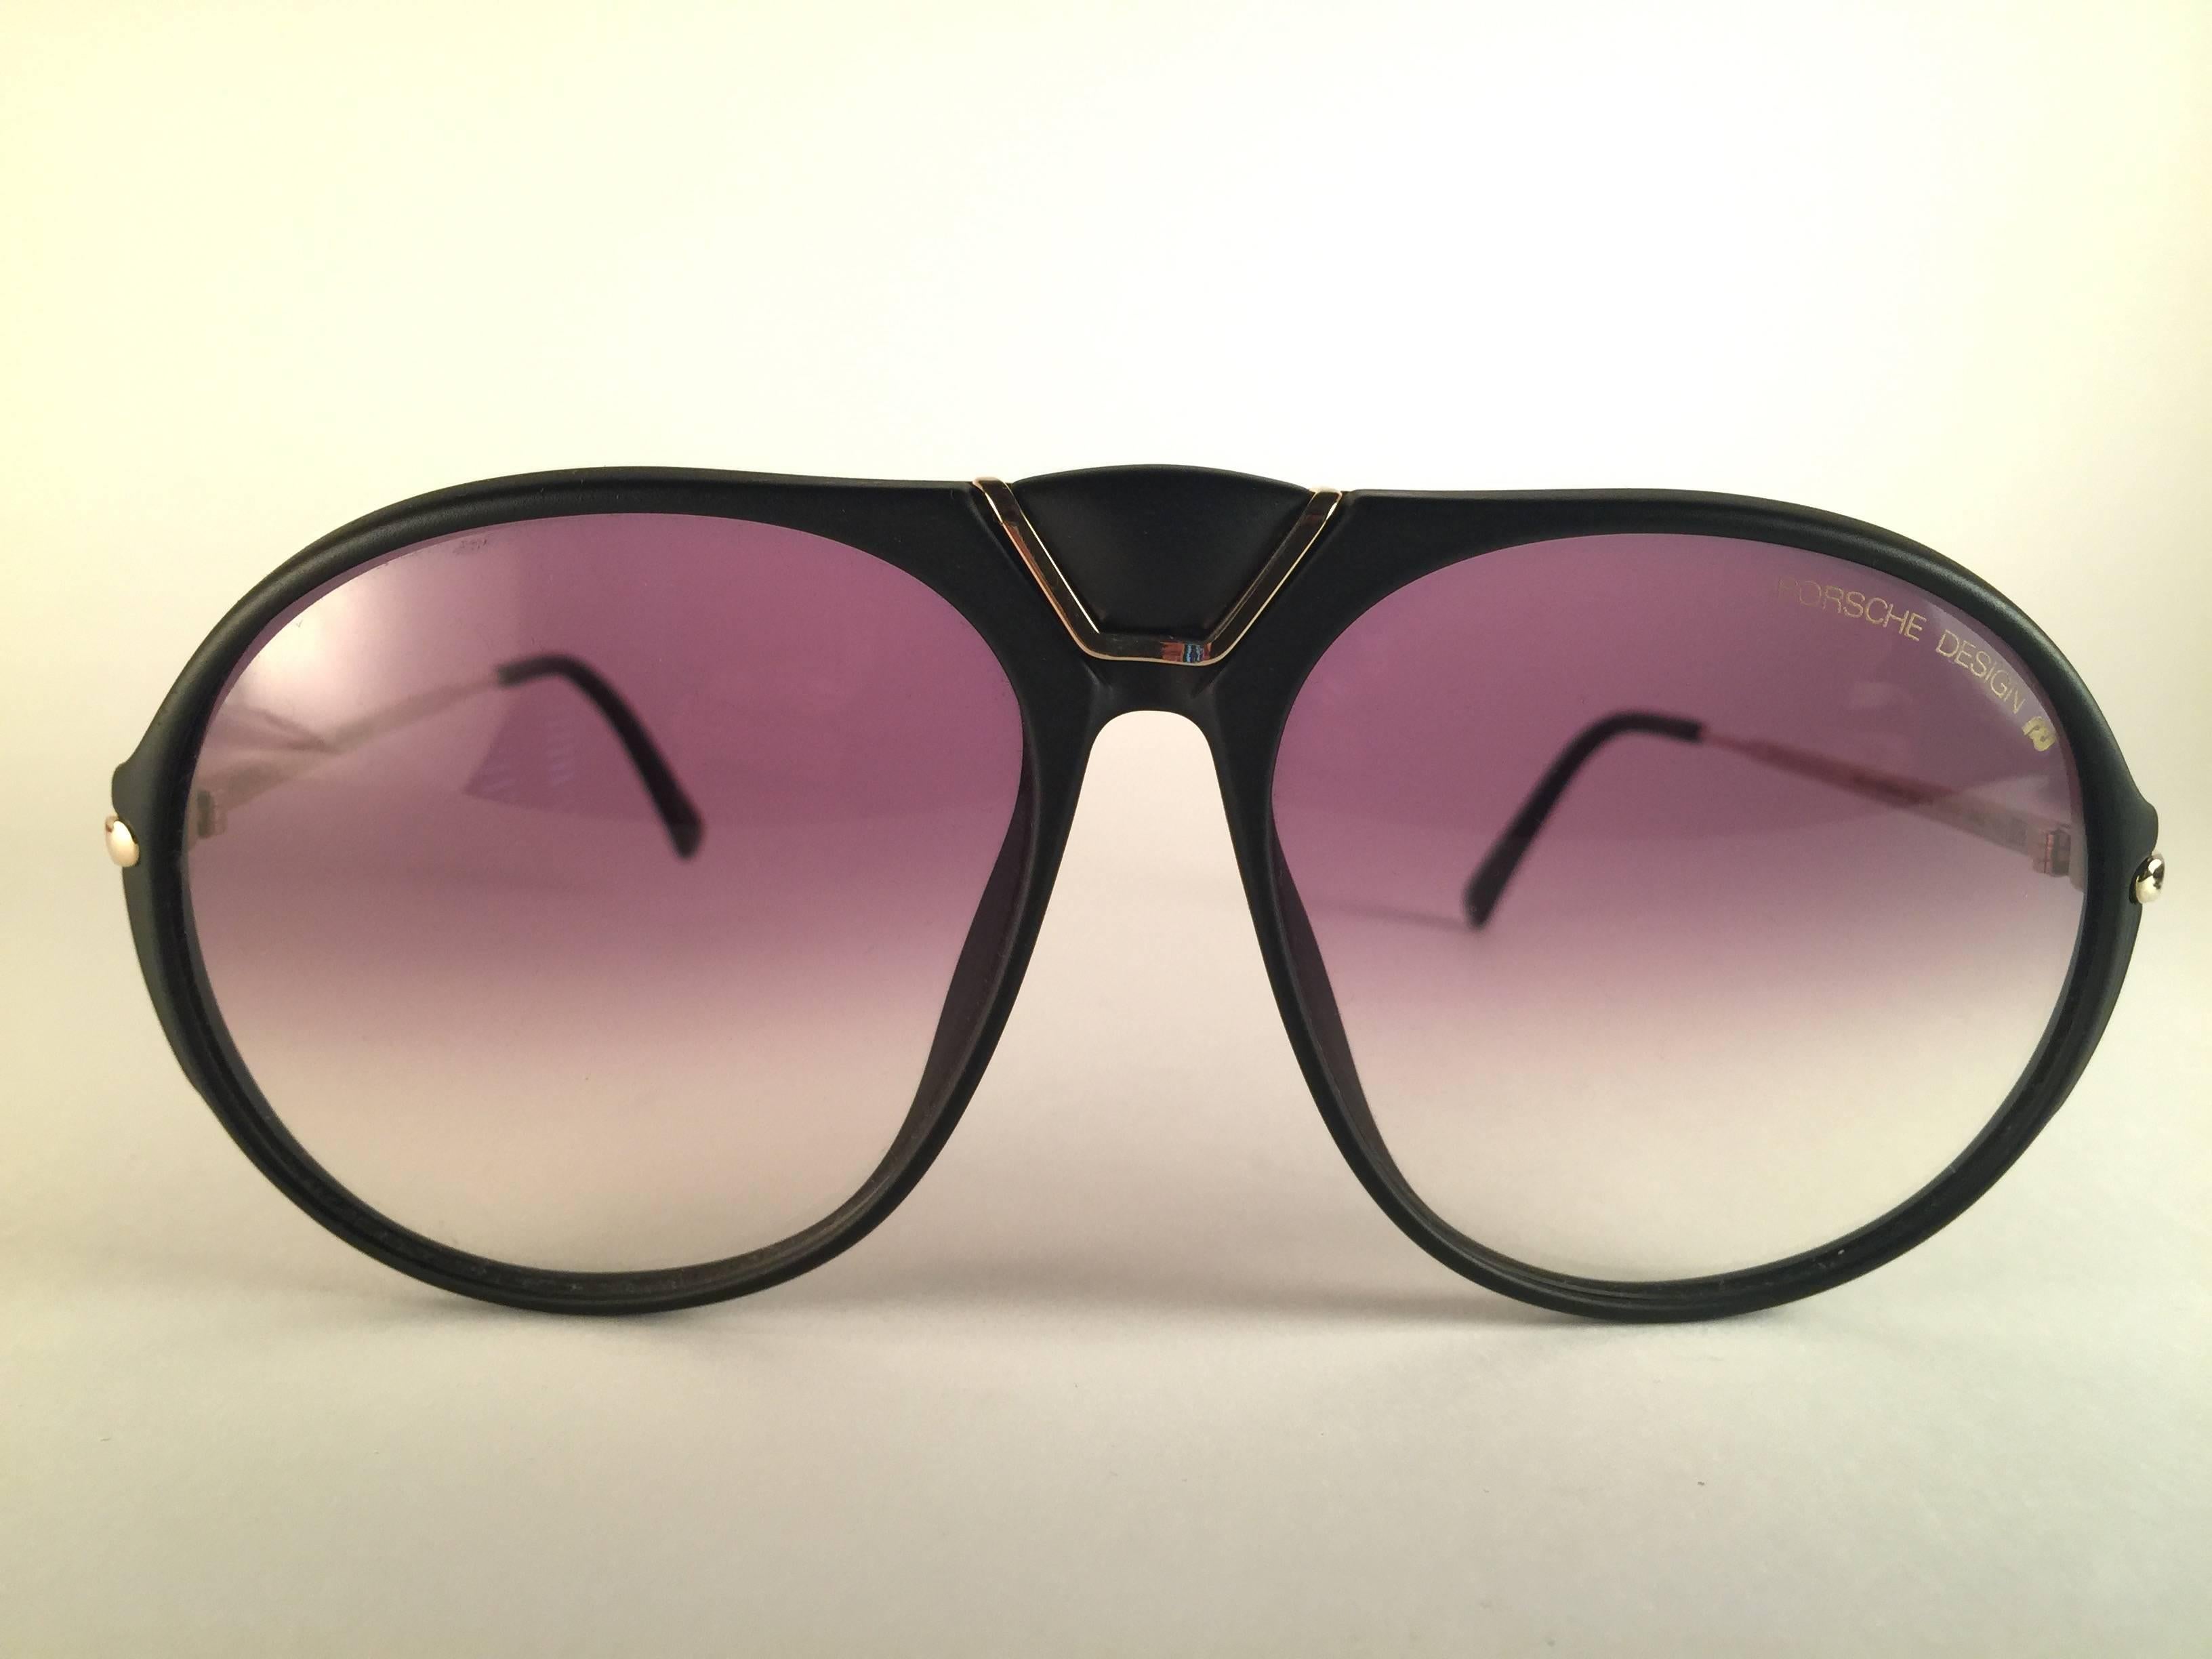 New 1980's Porsche Design 5659 Large Black and gold frame with light brown gradient lenses.  
Amazing craftsmanship and quality.  
Comes with the original Porsche hard case thats has some wear on it due to nearly 40 years of storage.  There is no